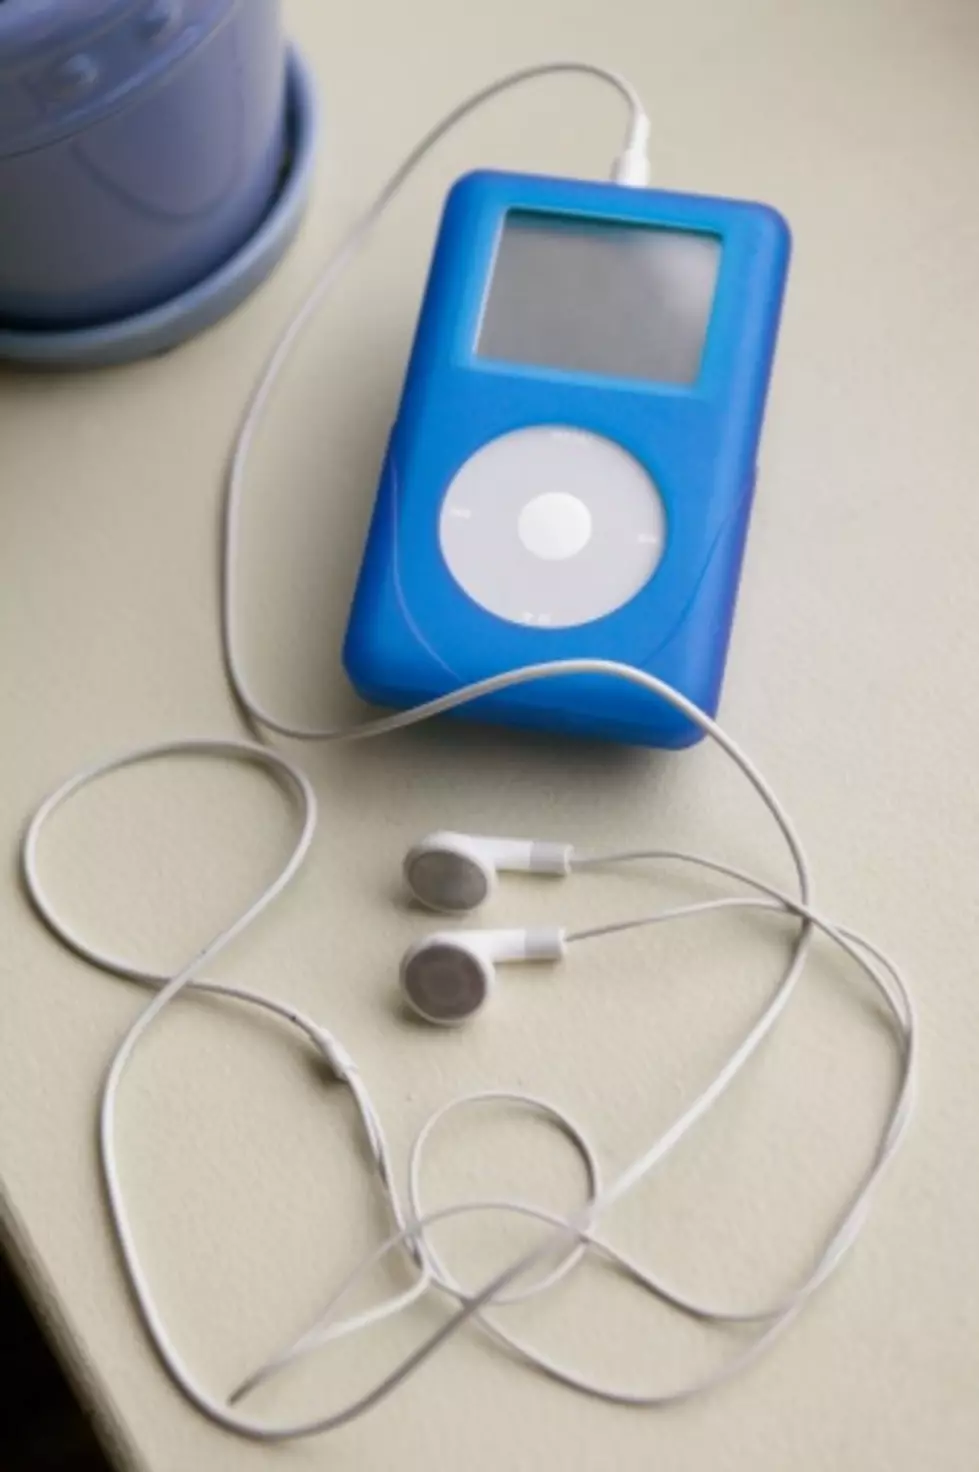 People Are Buying Classic IPods for $900 [PHOTO]